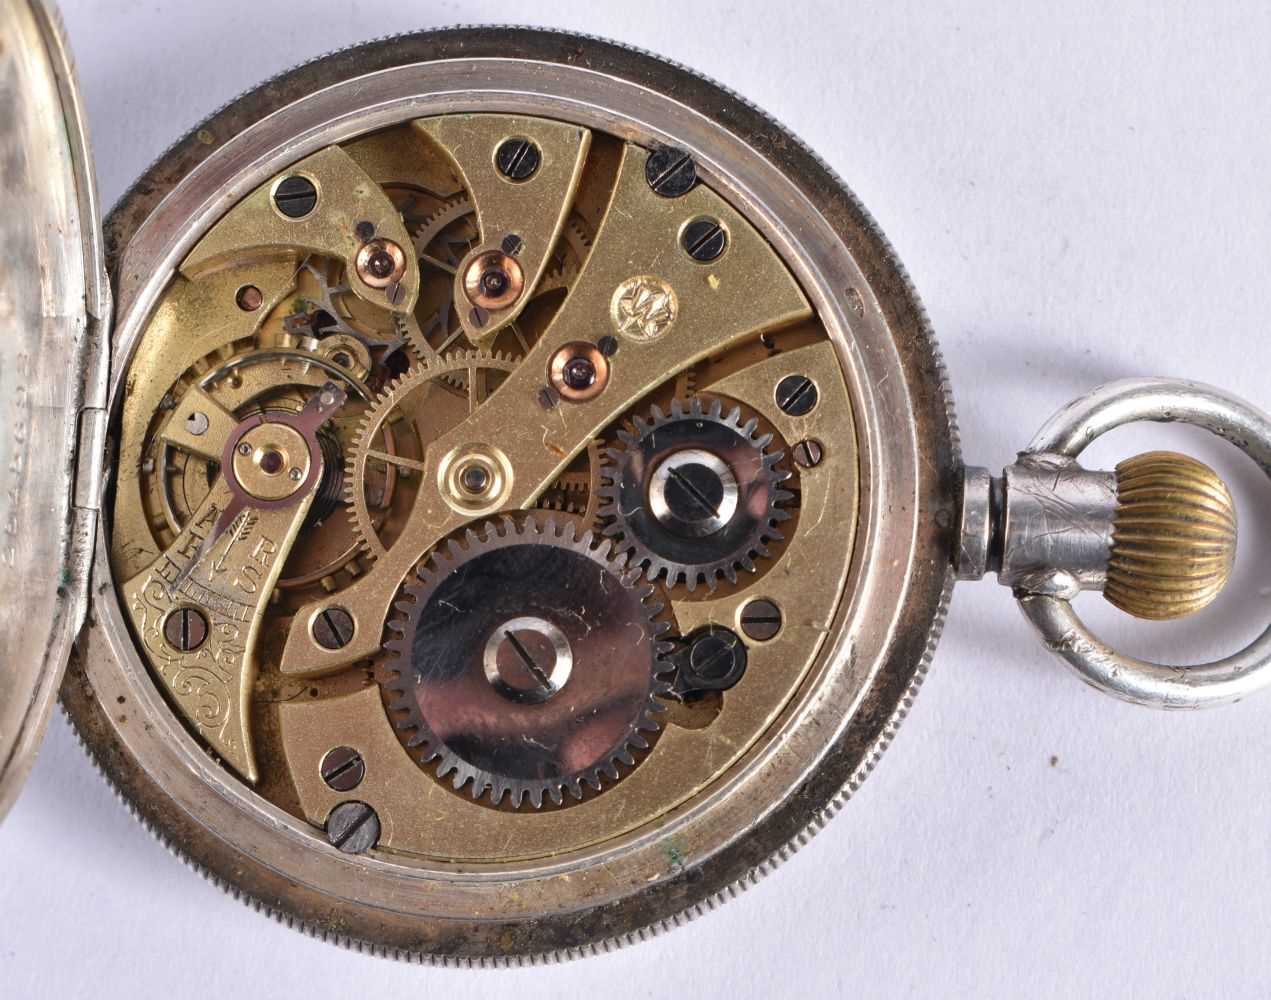 WEST END WATCH CO Silver Gents Half Hunter Pocket Watch.  Stamped 925.  Movement - Hand-wind. - Image 2 of 4